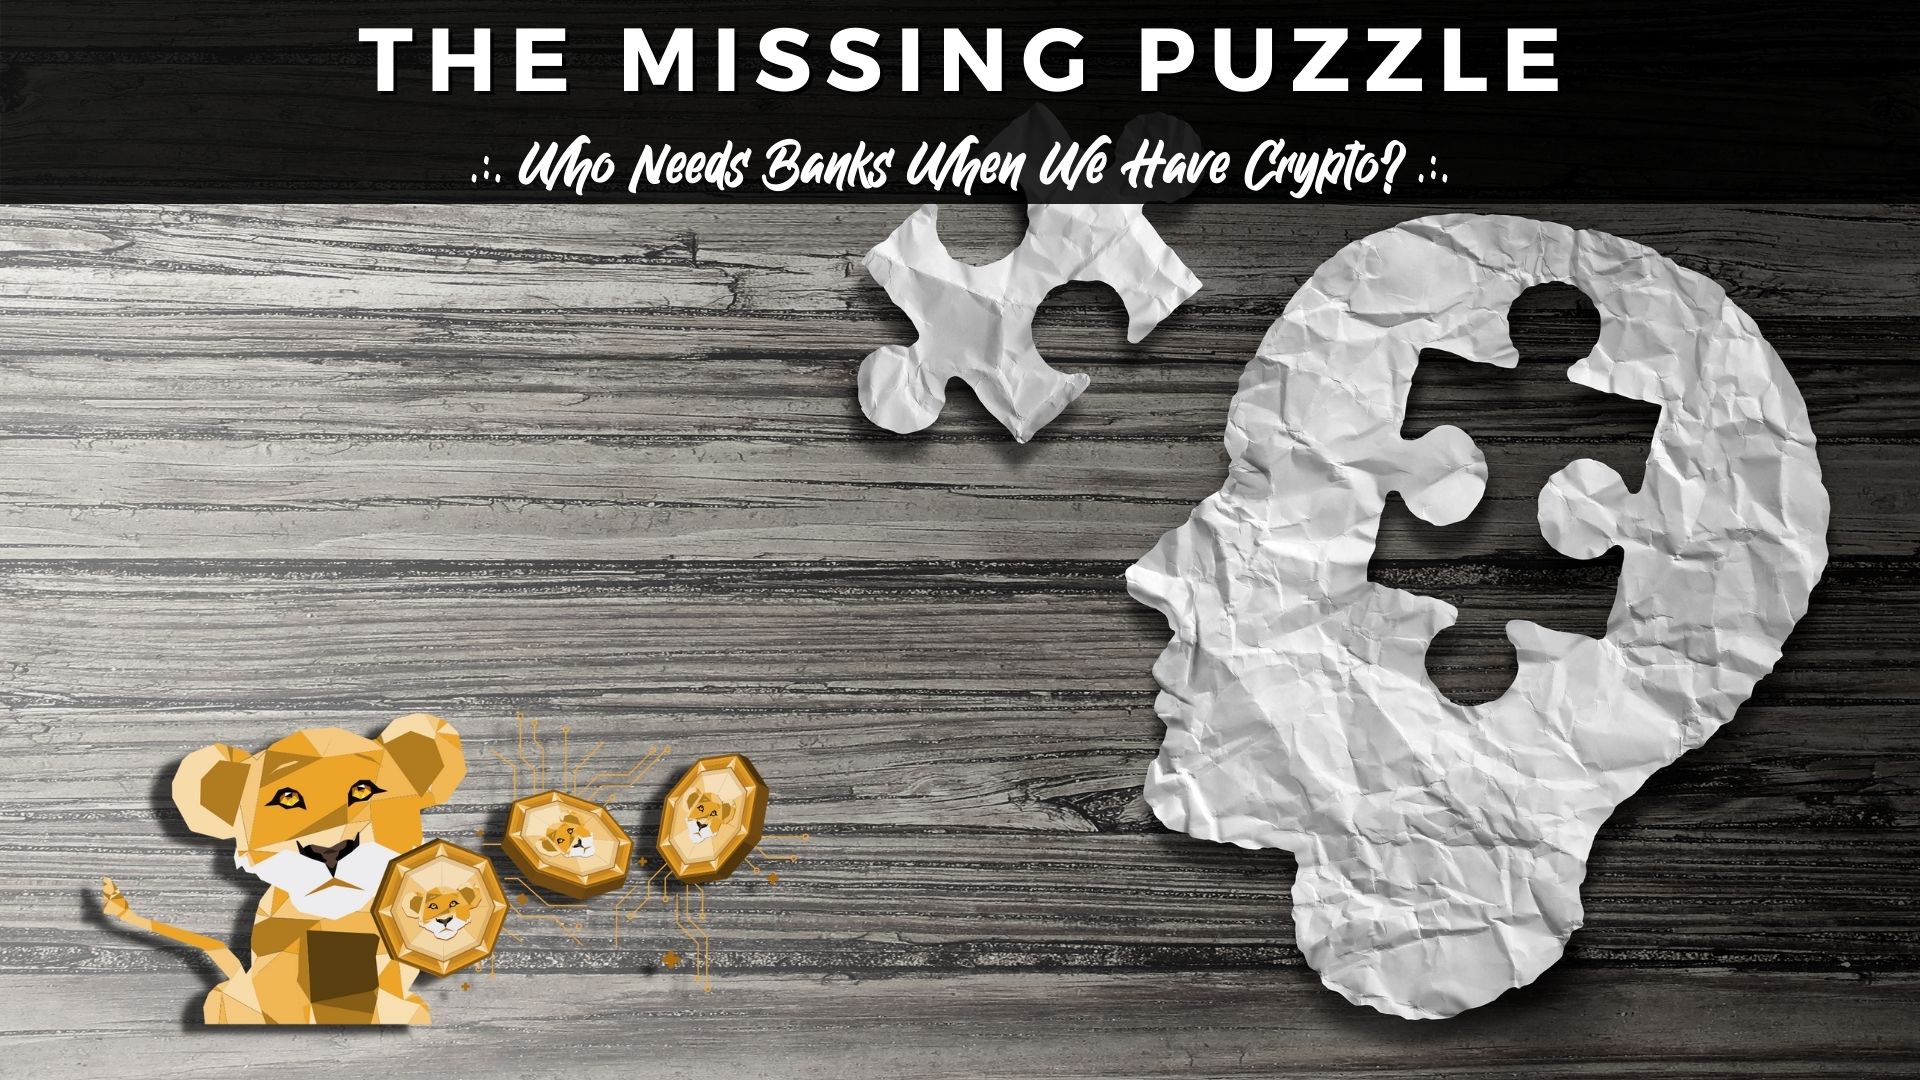 @ph1102/the-missing-puzzle-who-needs-banks-when-we-have-crypto